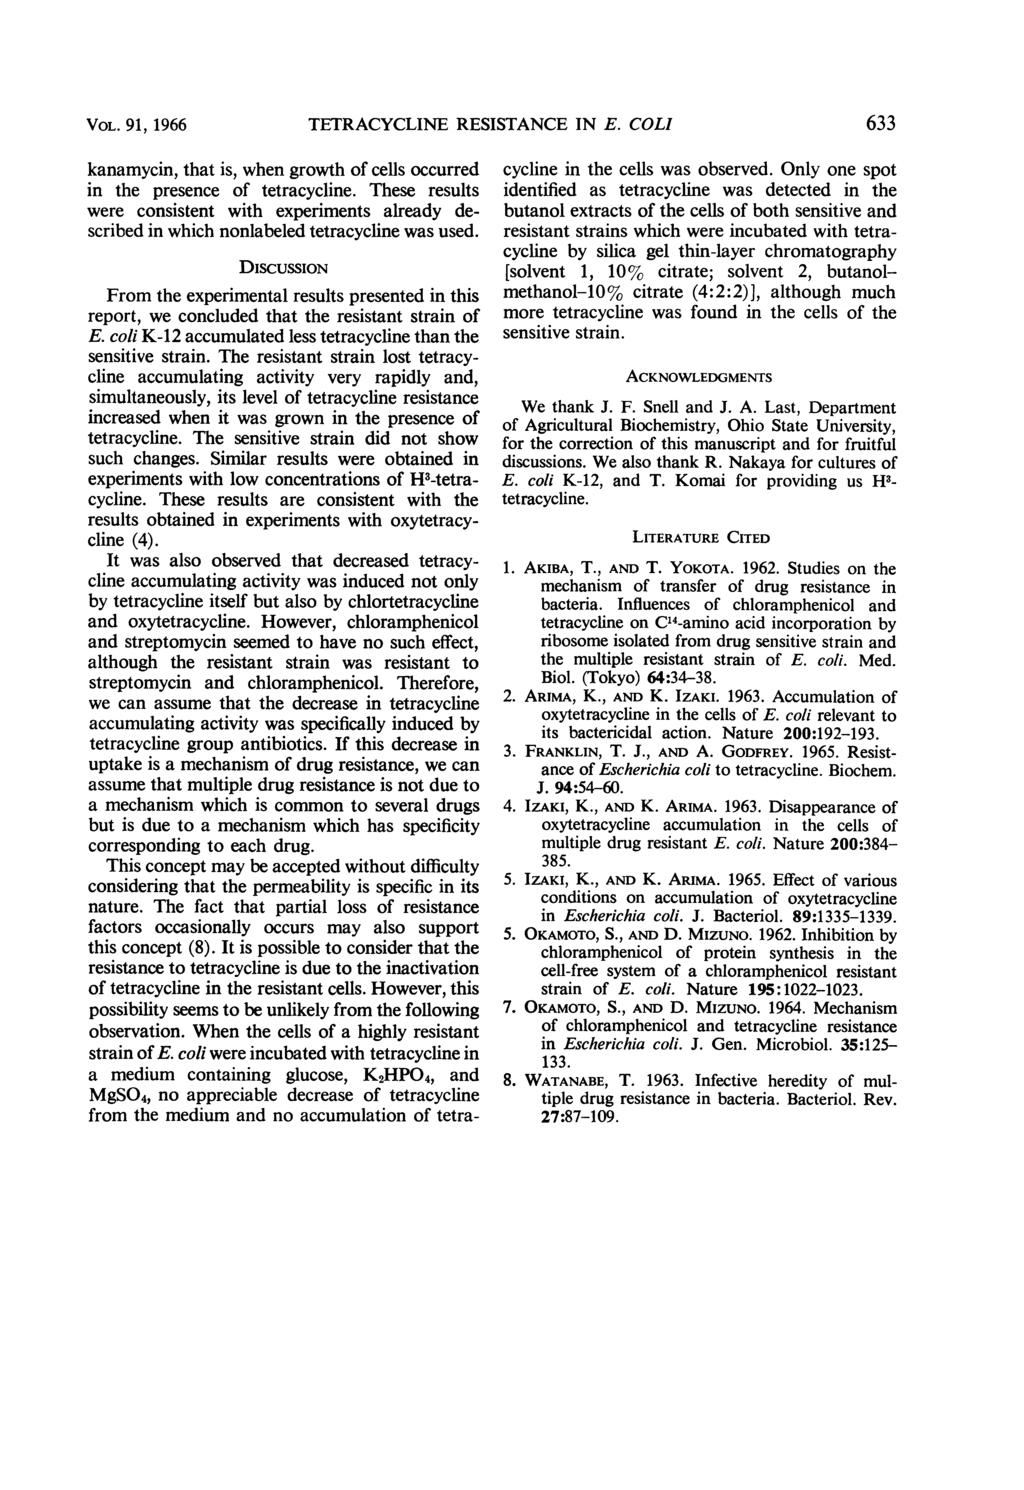 VOL. 91, 1966 TETRACYCLINE RESISTANCE IN E. COLI 633 kanamycin, that is, when growth of cells occurred in the presence of tetracycline.